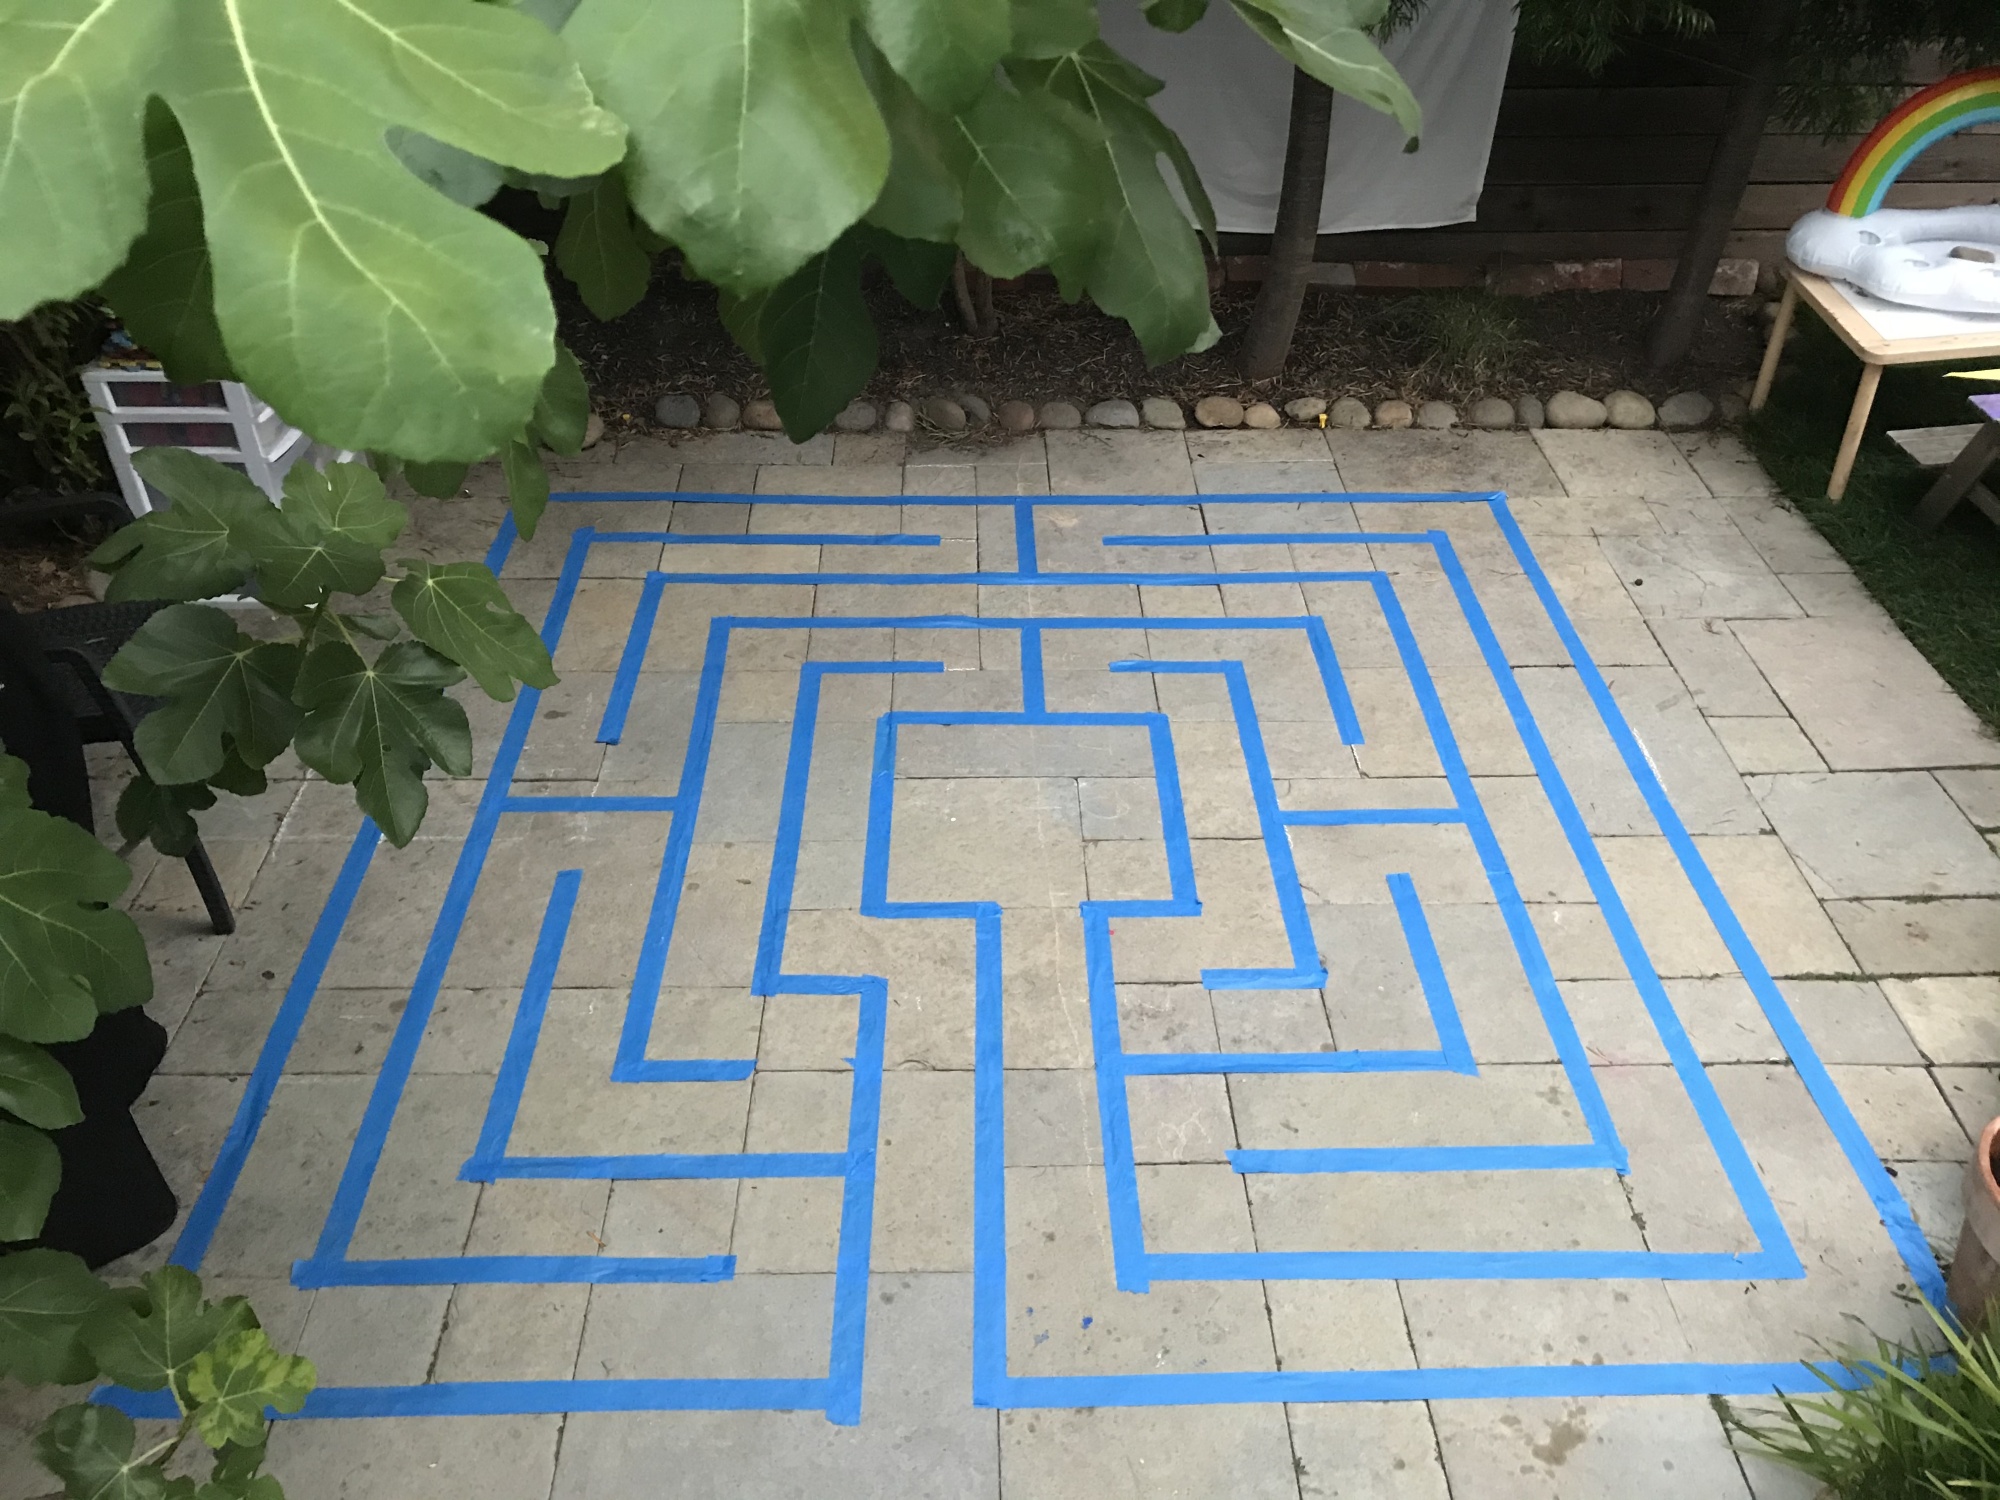 A simple tape labyrinth on craftsman Lars Howlett’s back patio in Oakland, California.&nbsp;